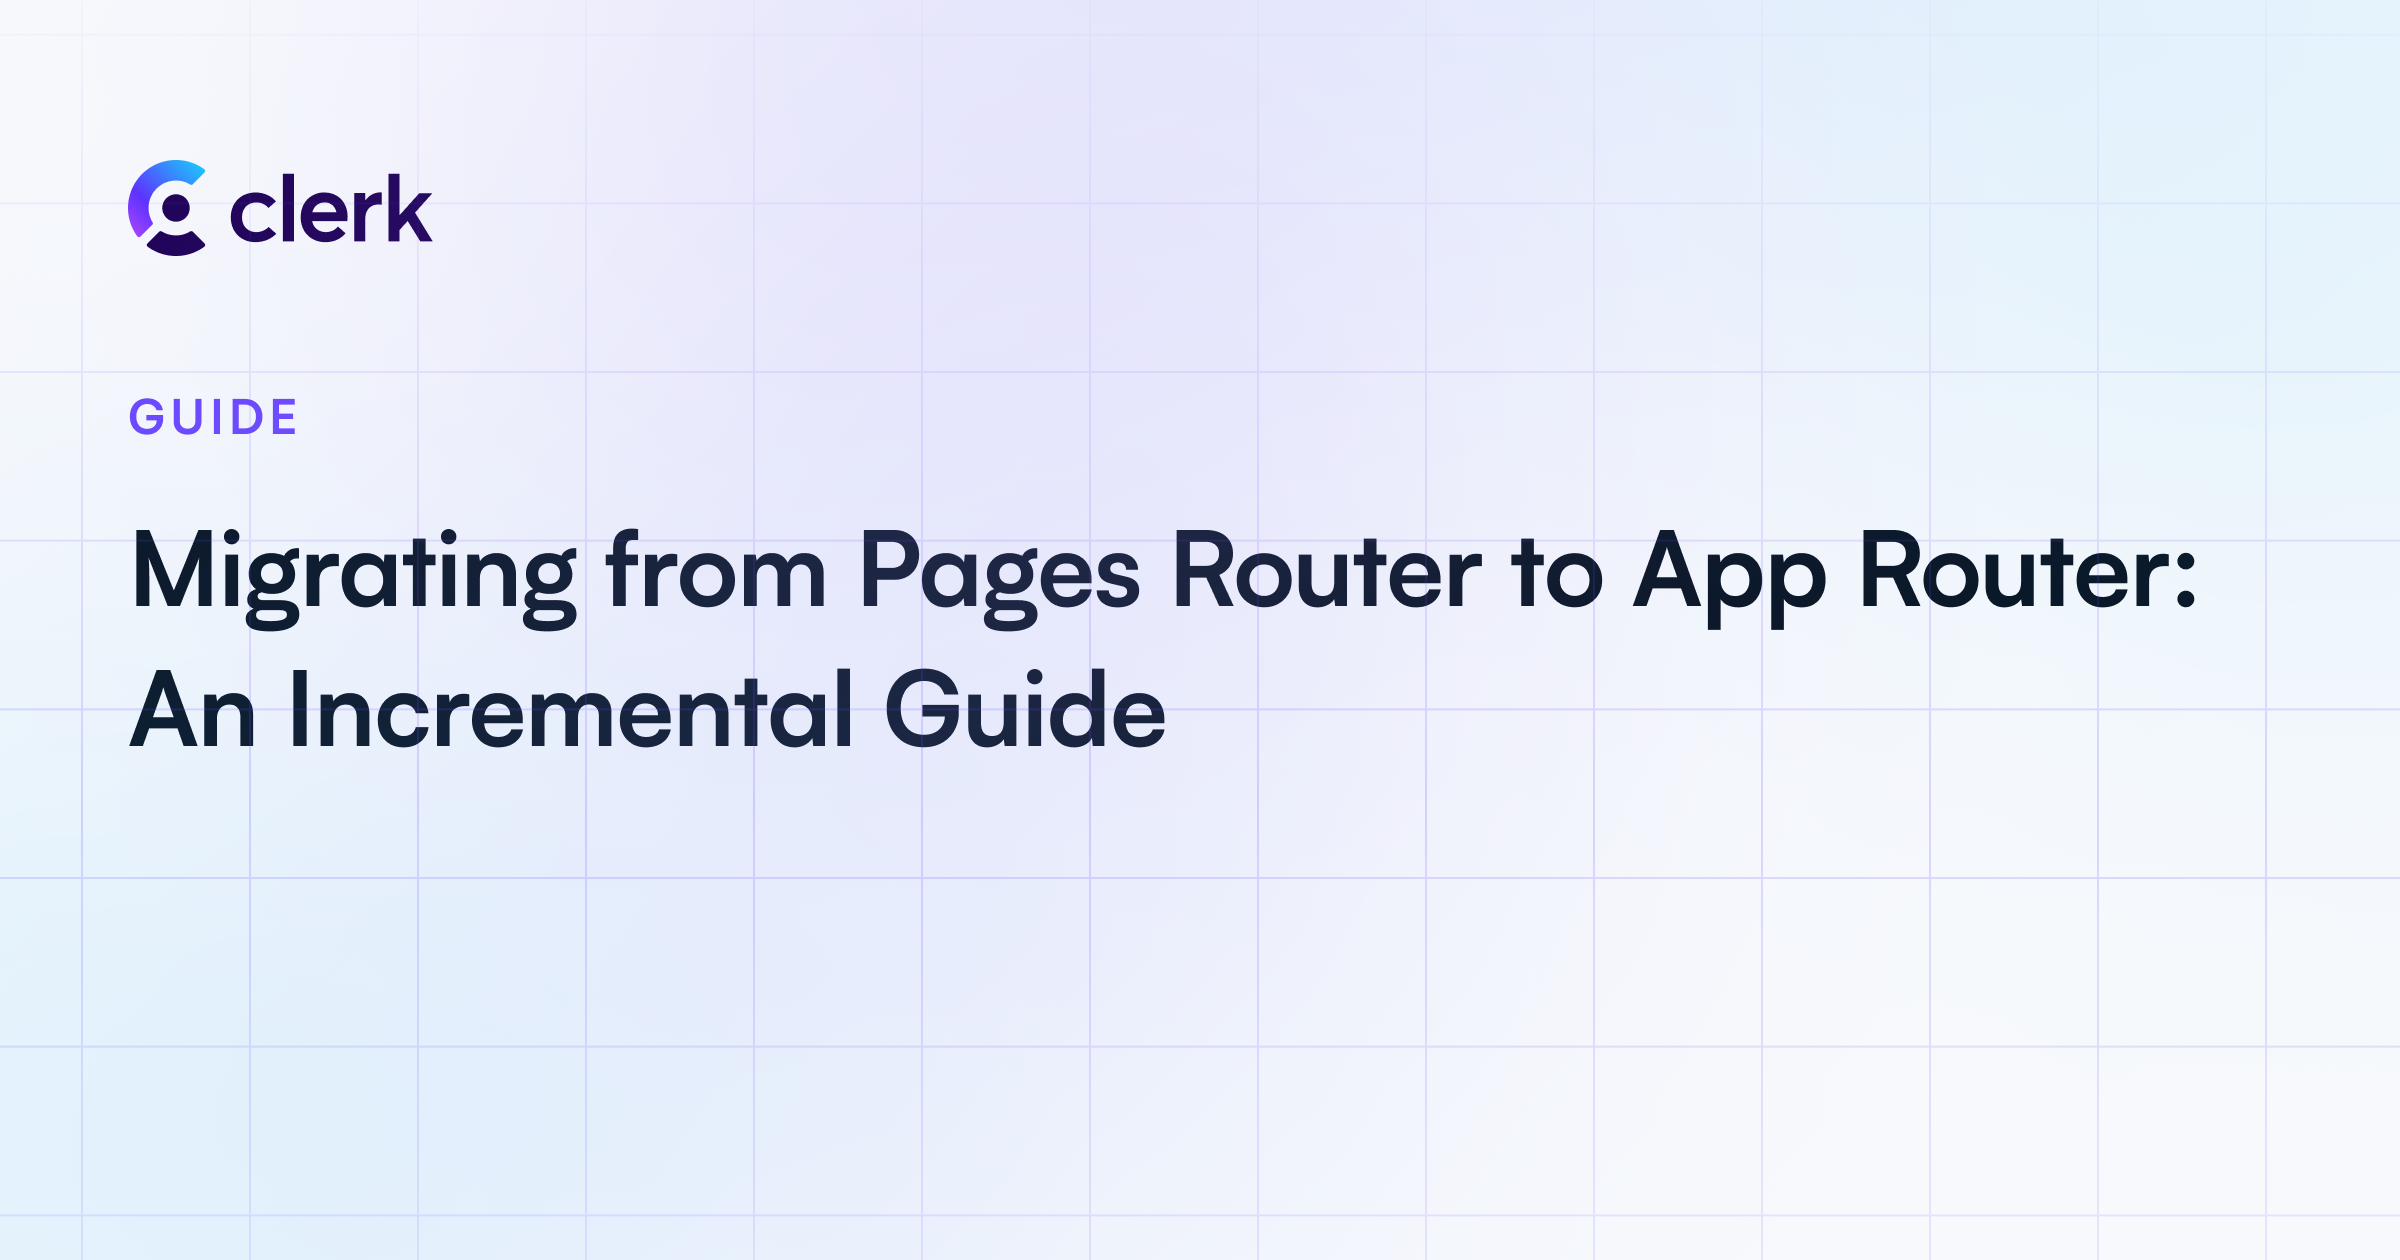 Migrating from Pages Router to App Router: An Incremental Guide